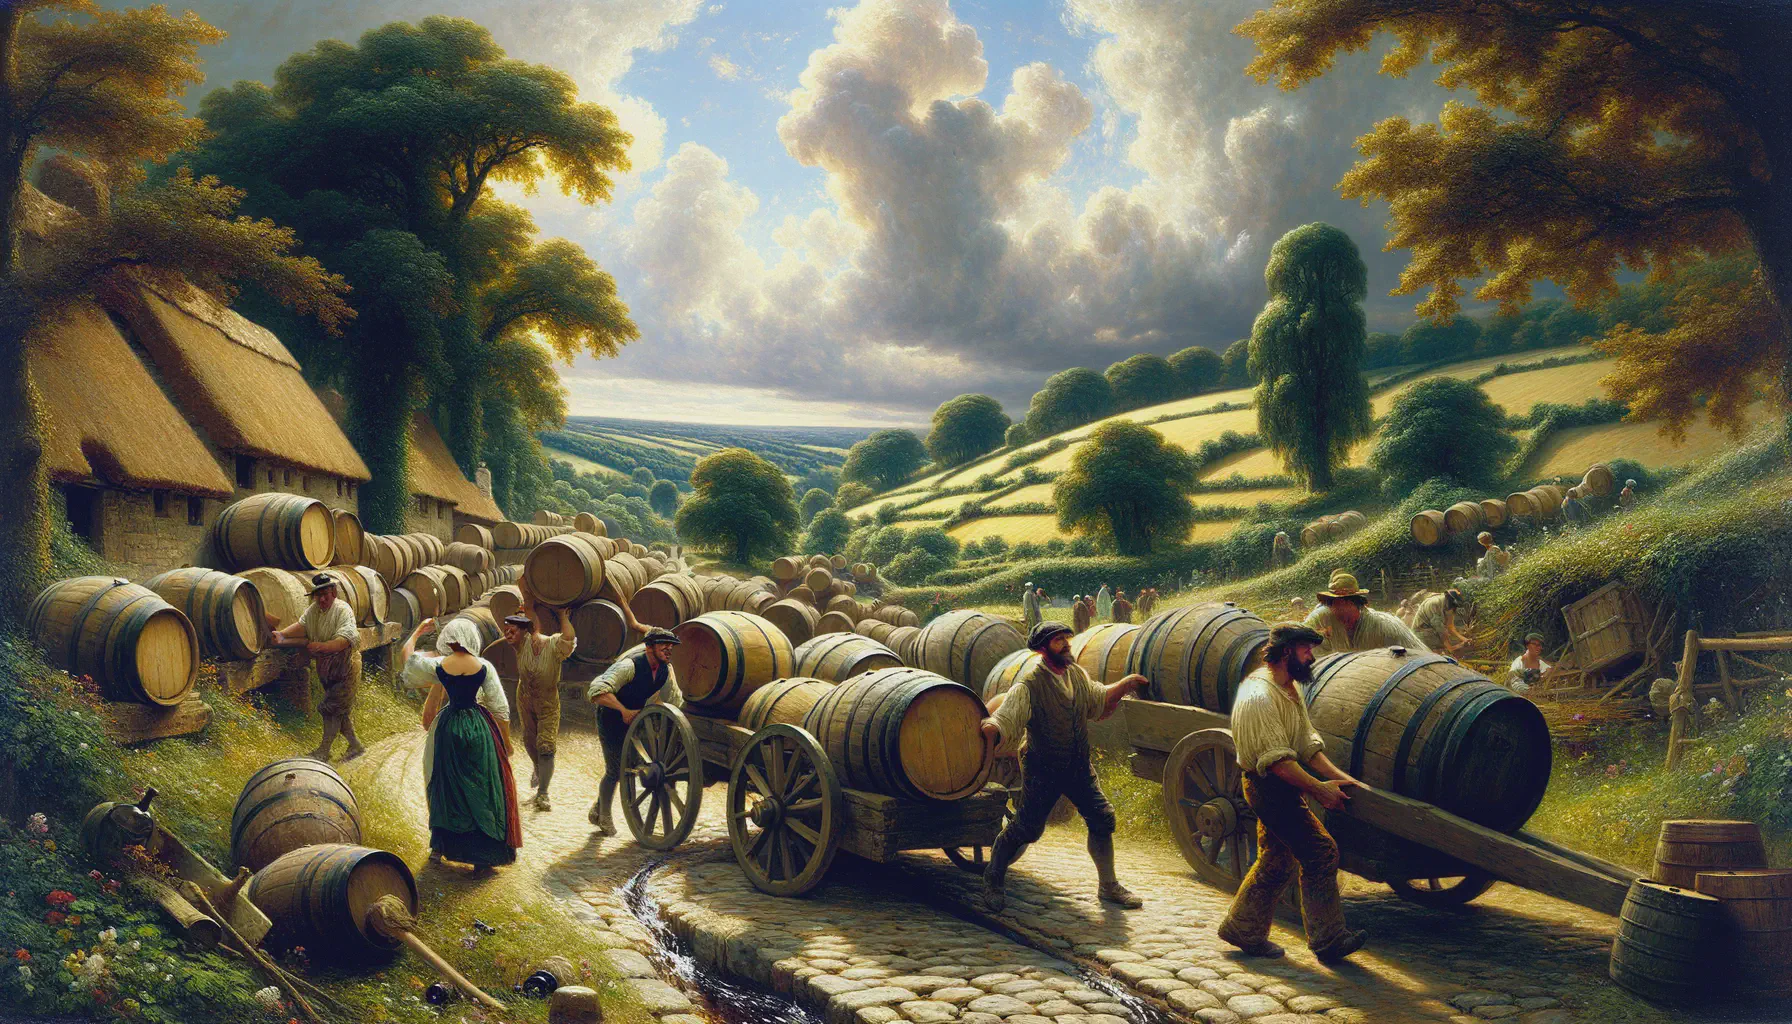 An image of barrels being loaded onto carts in a style similar to that of John Constable.